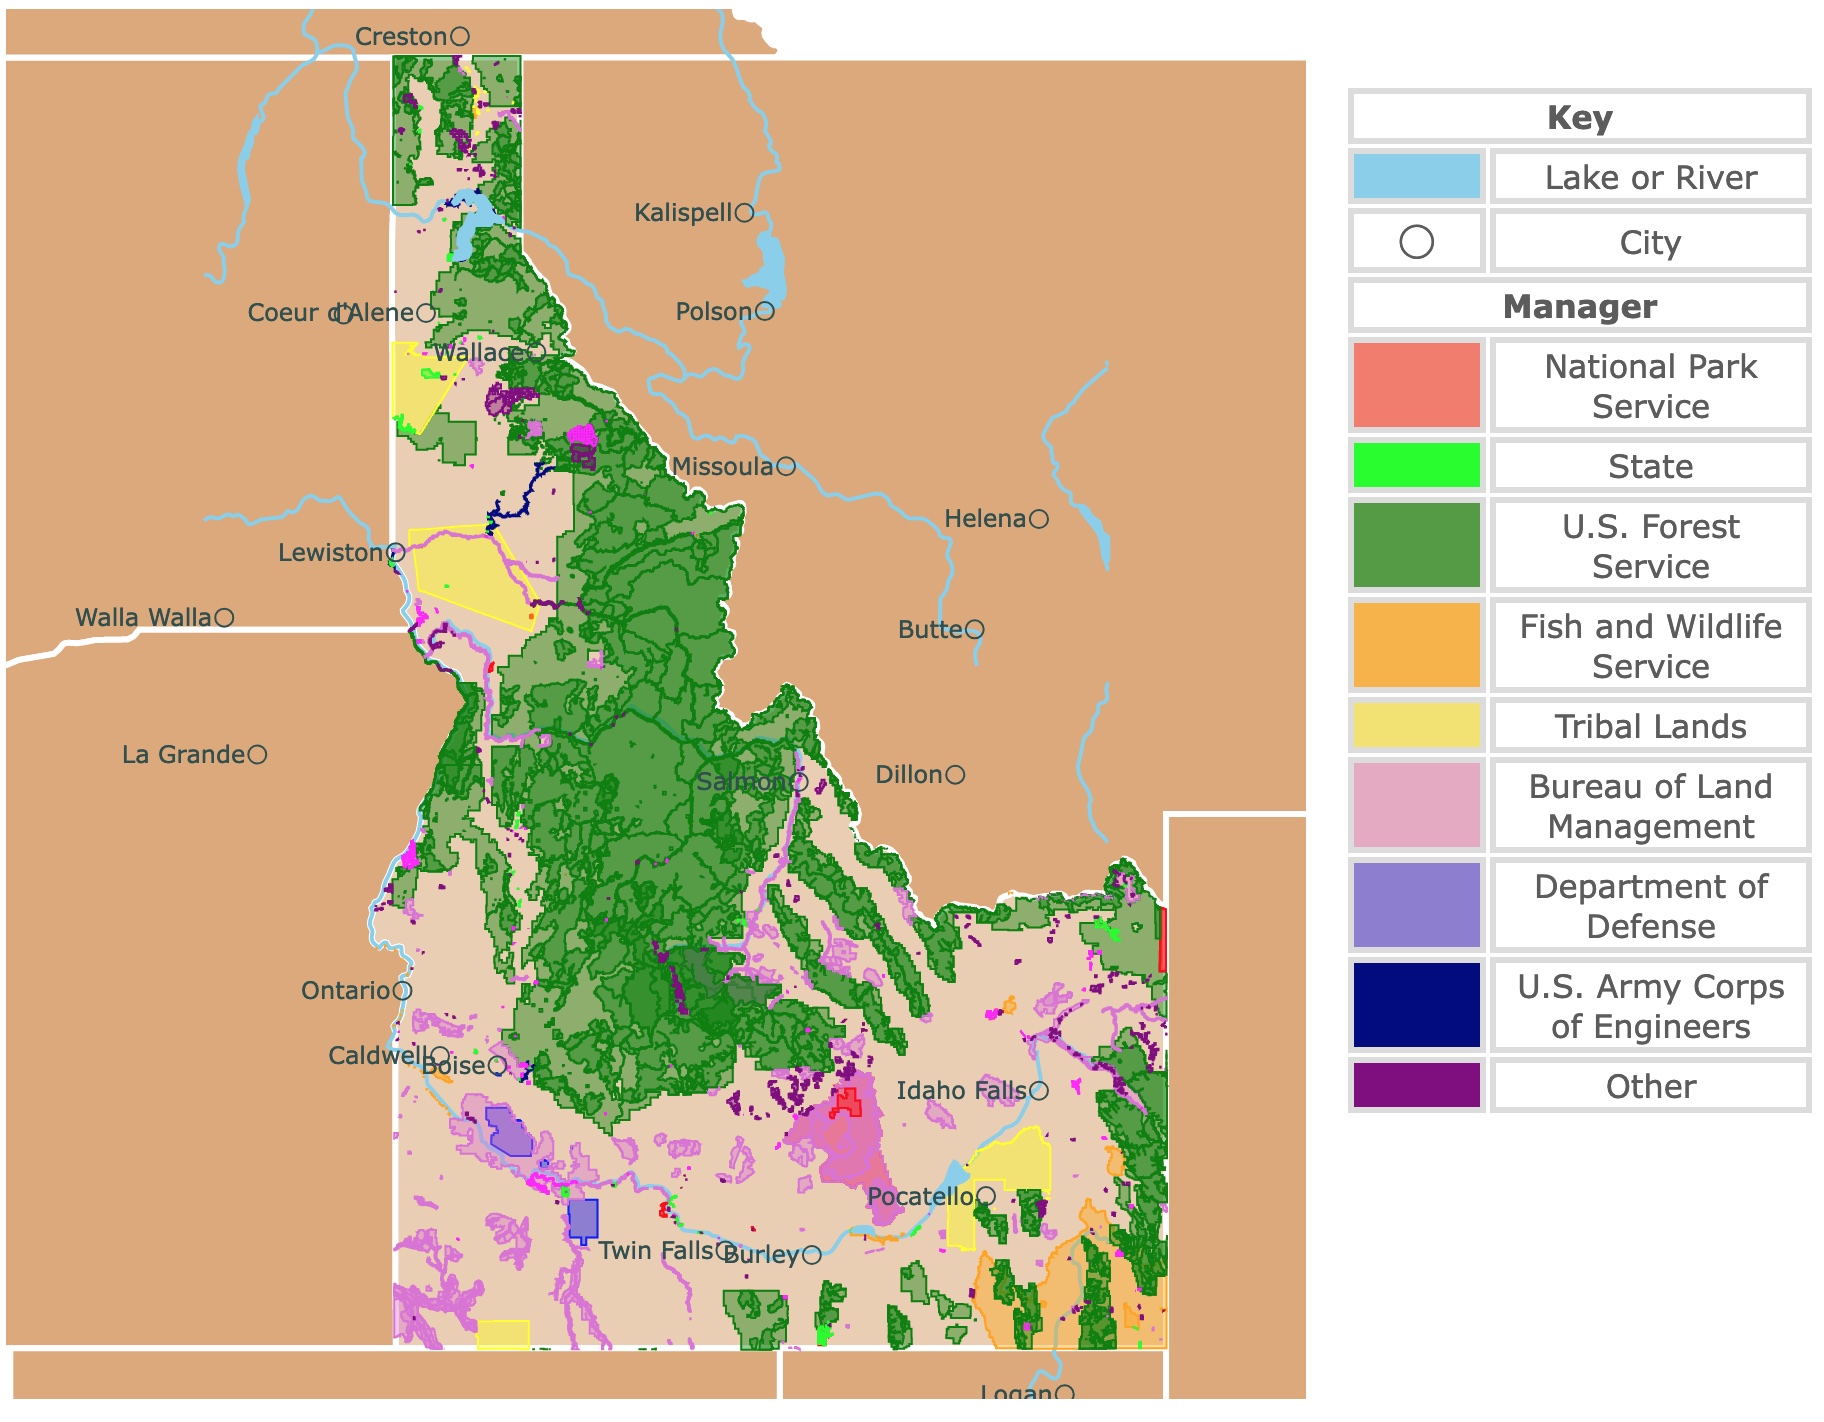 Map of Idaho's state parks, national parks, forests, and public lands areas